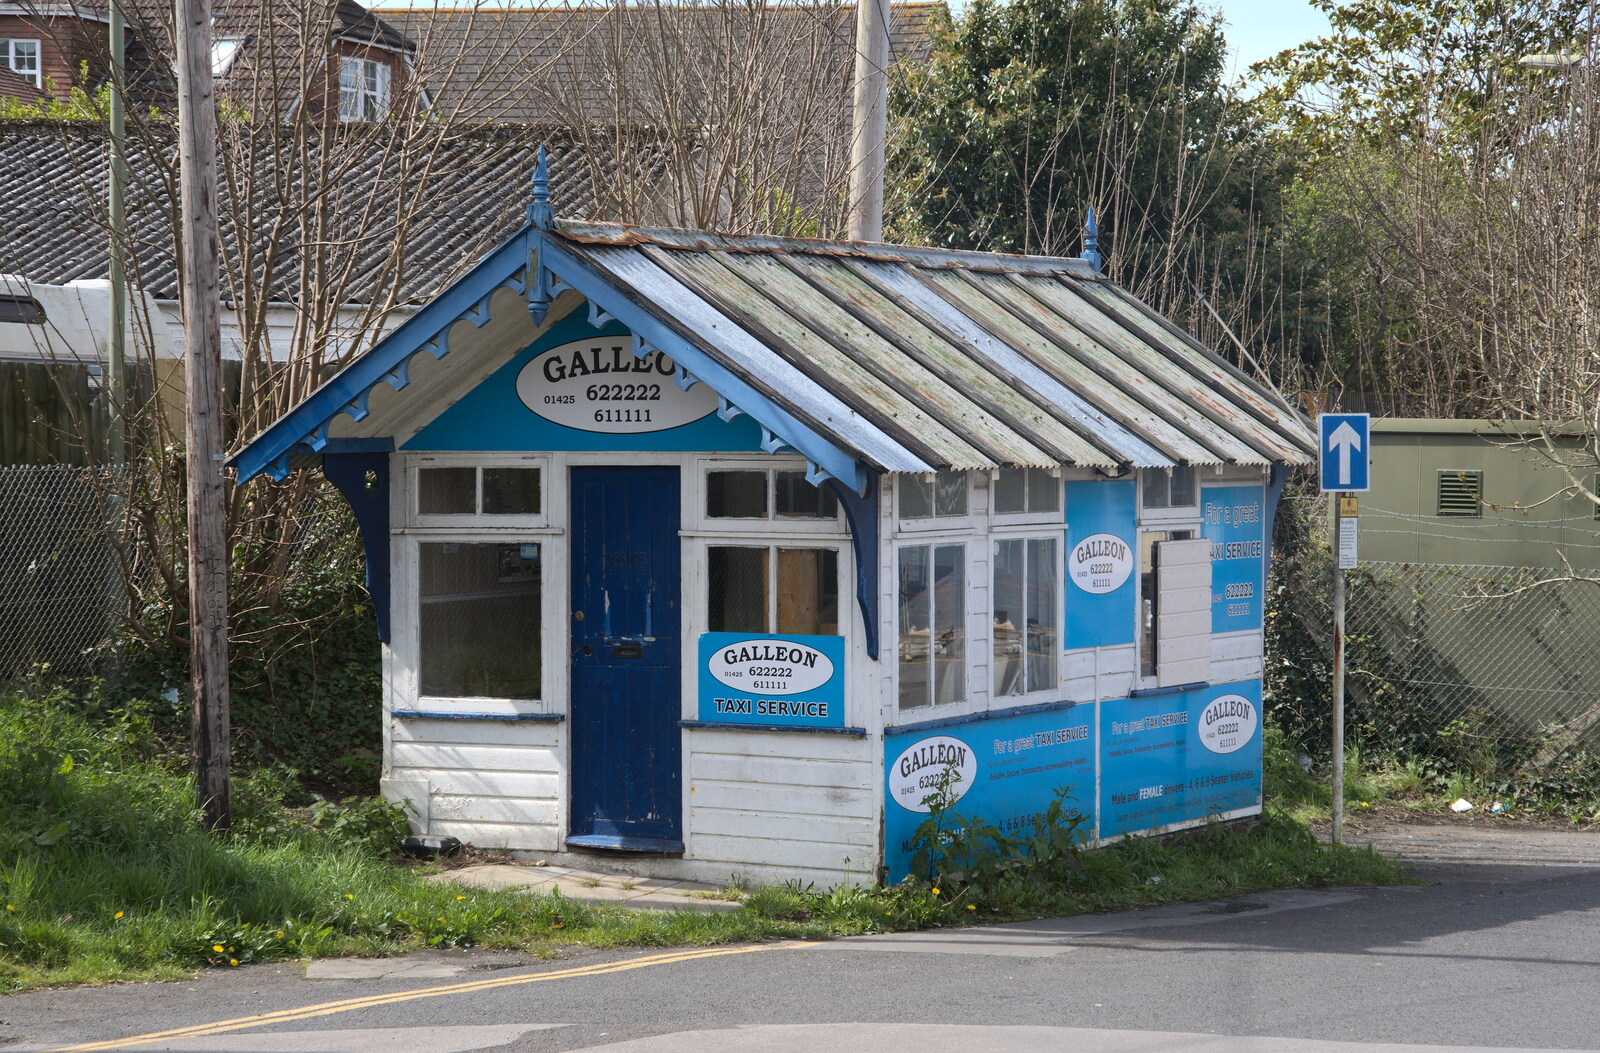 Bernice's Birthday and Walks Around New Milton and Lymington, Hampshire - 10th April 2022: The old Galleon Taxi office in the car park